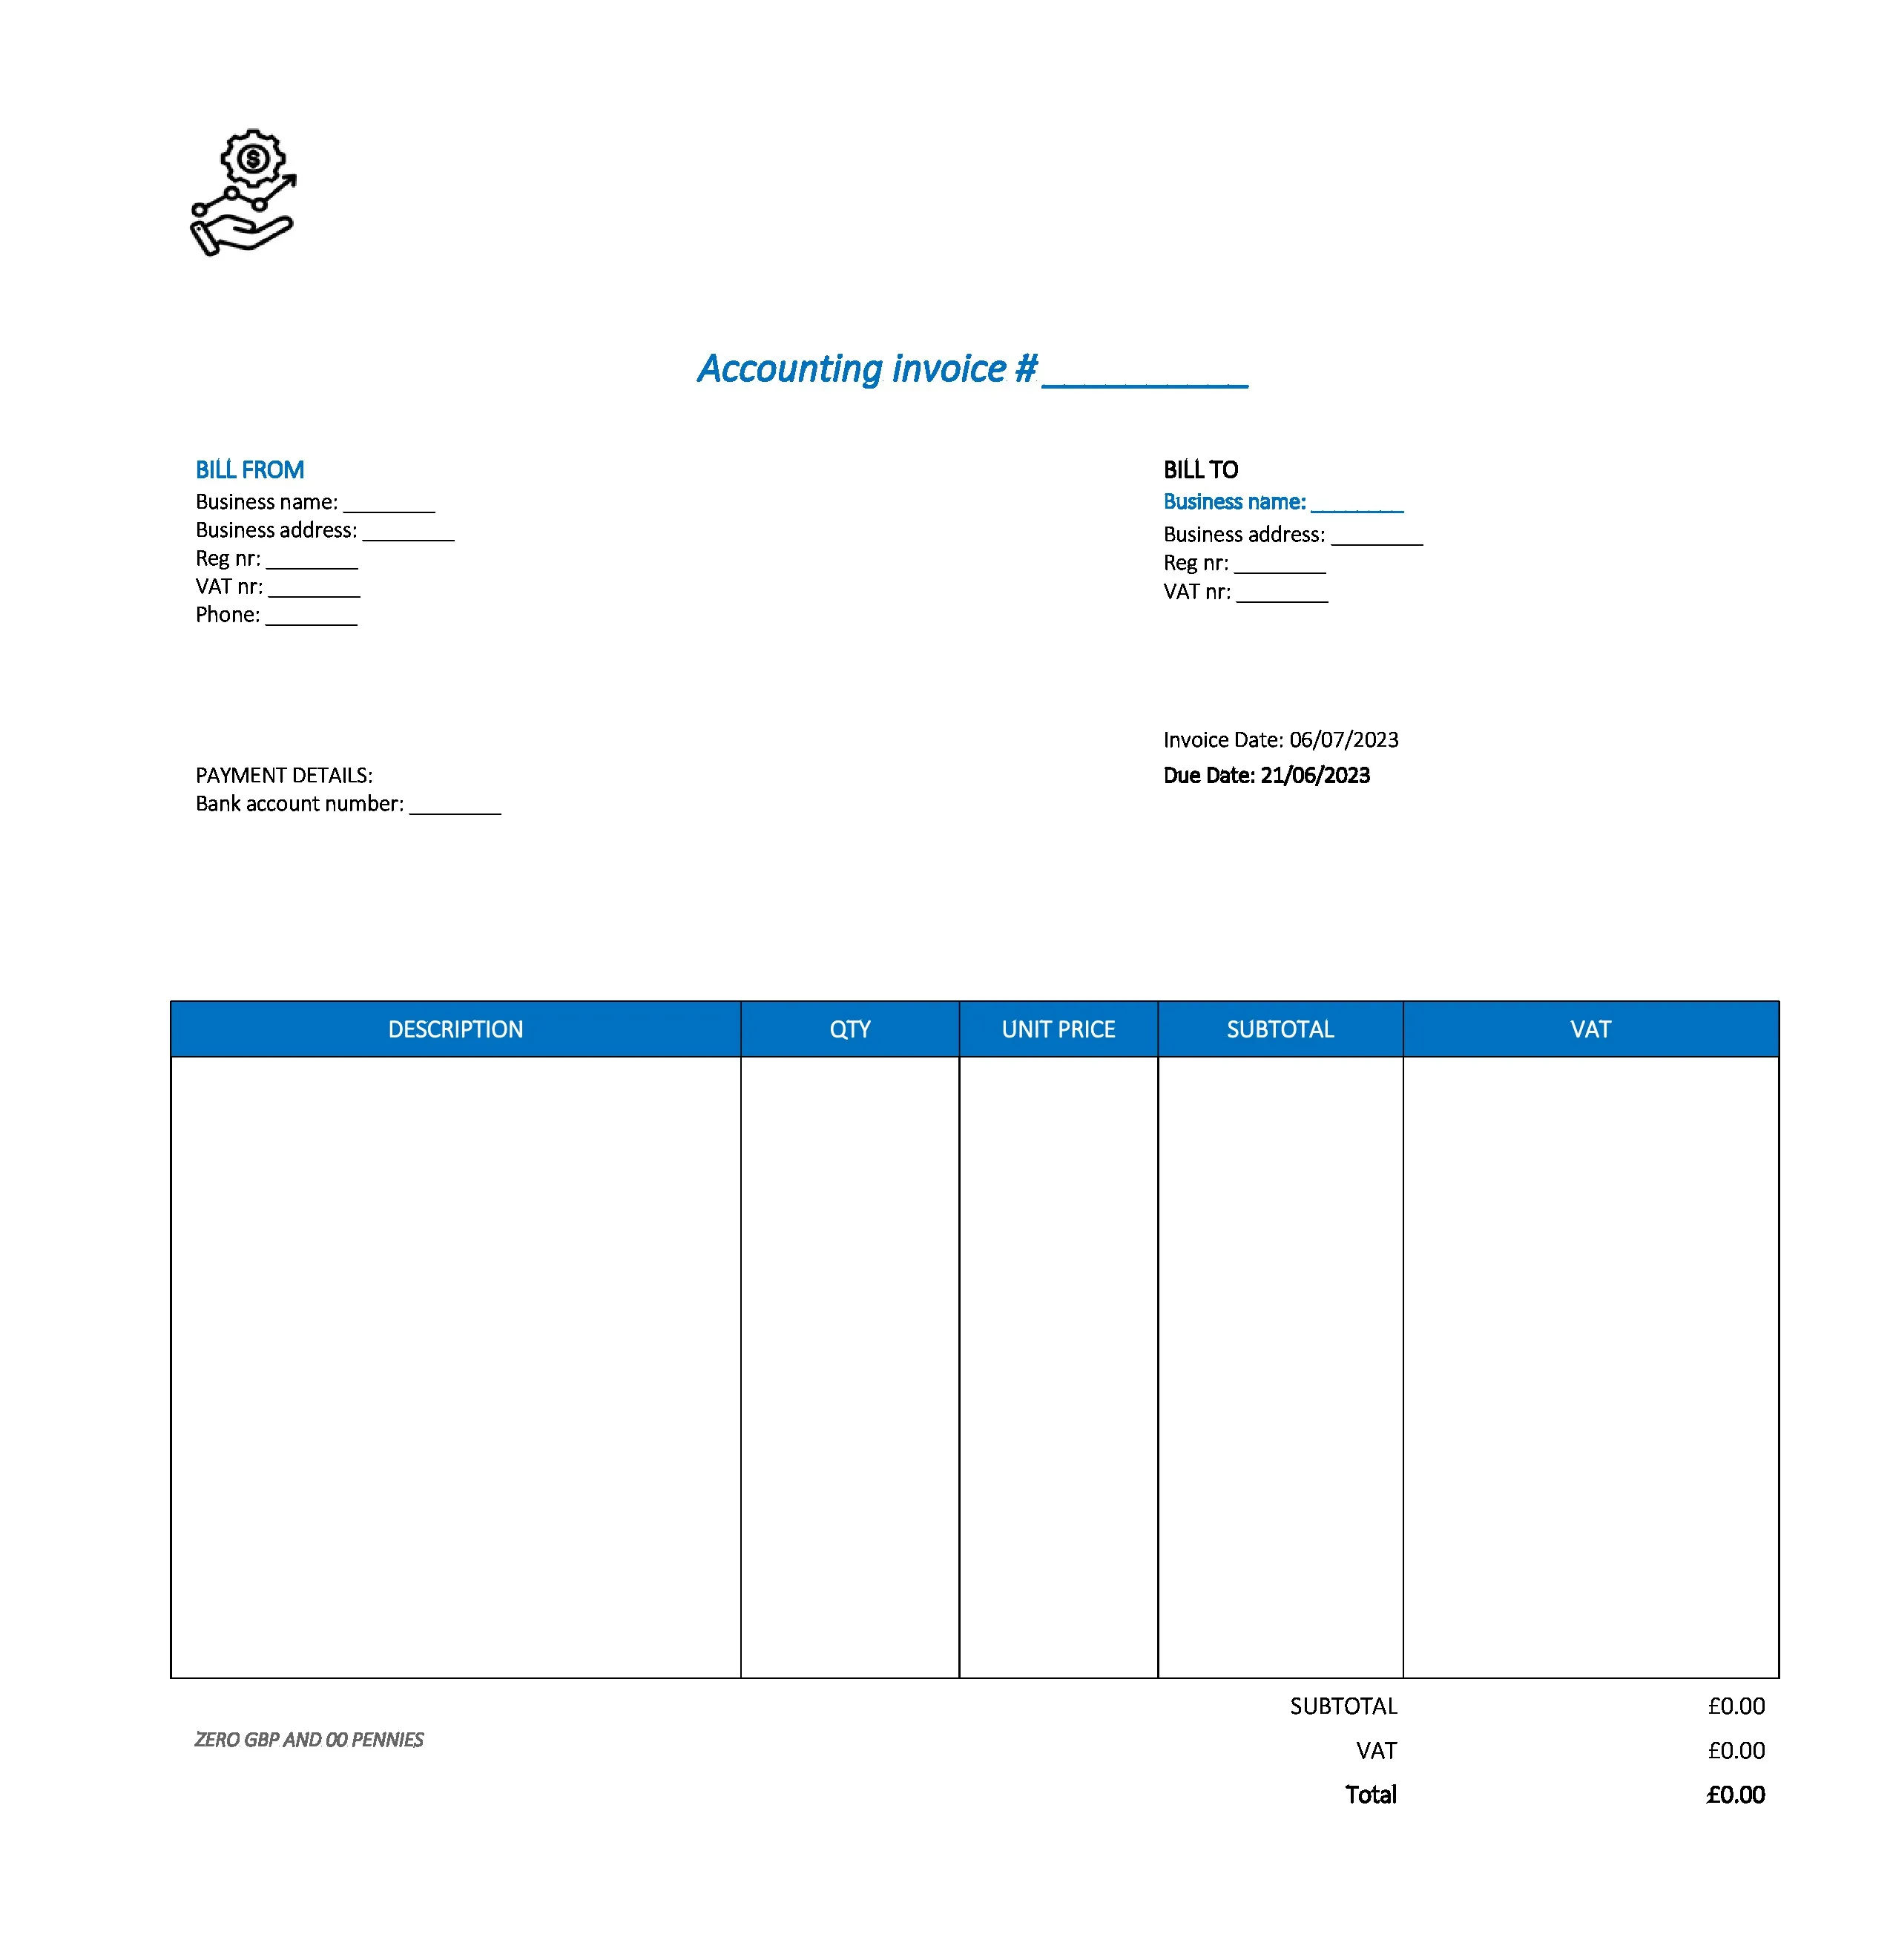 typical accounting invoice template UK Excel / Google sheets